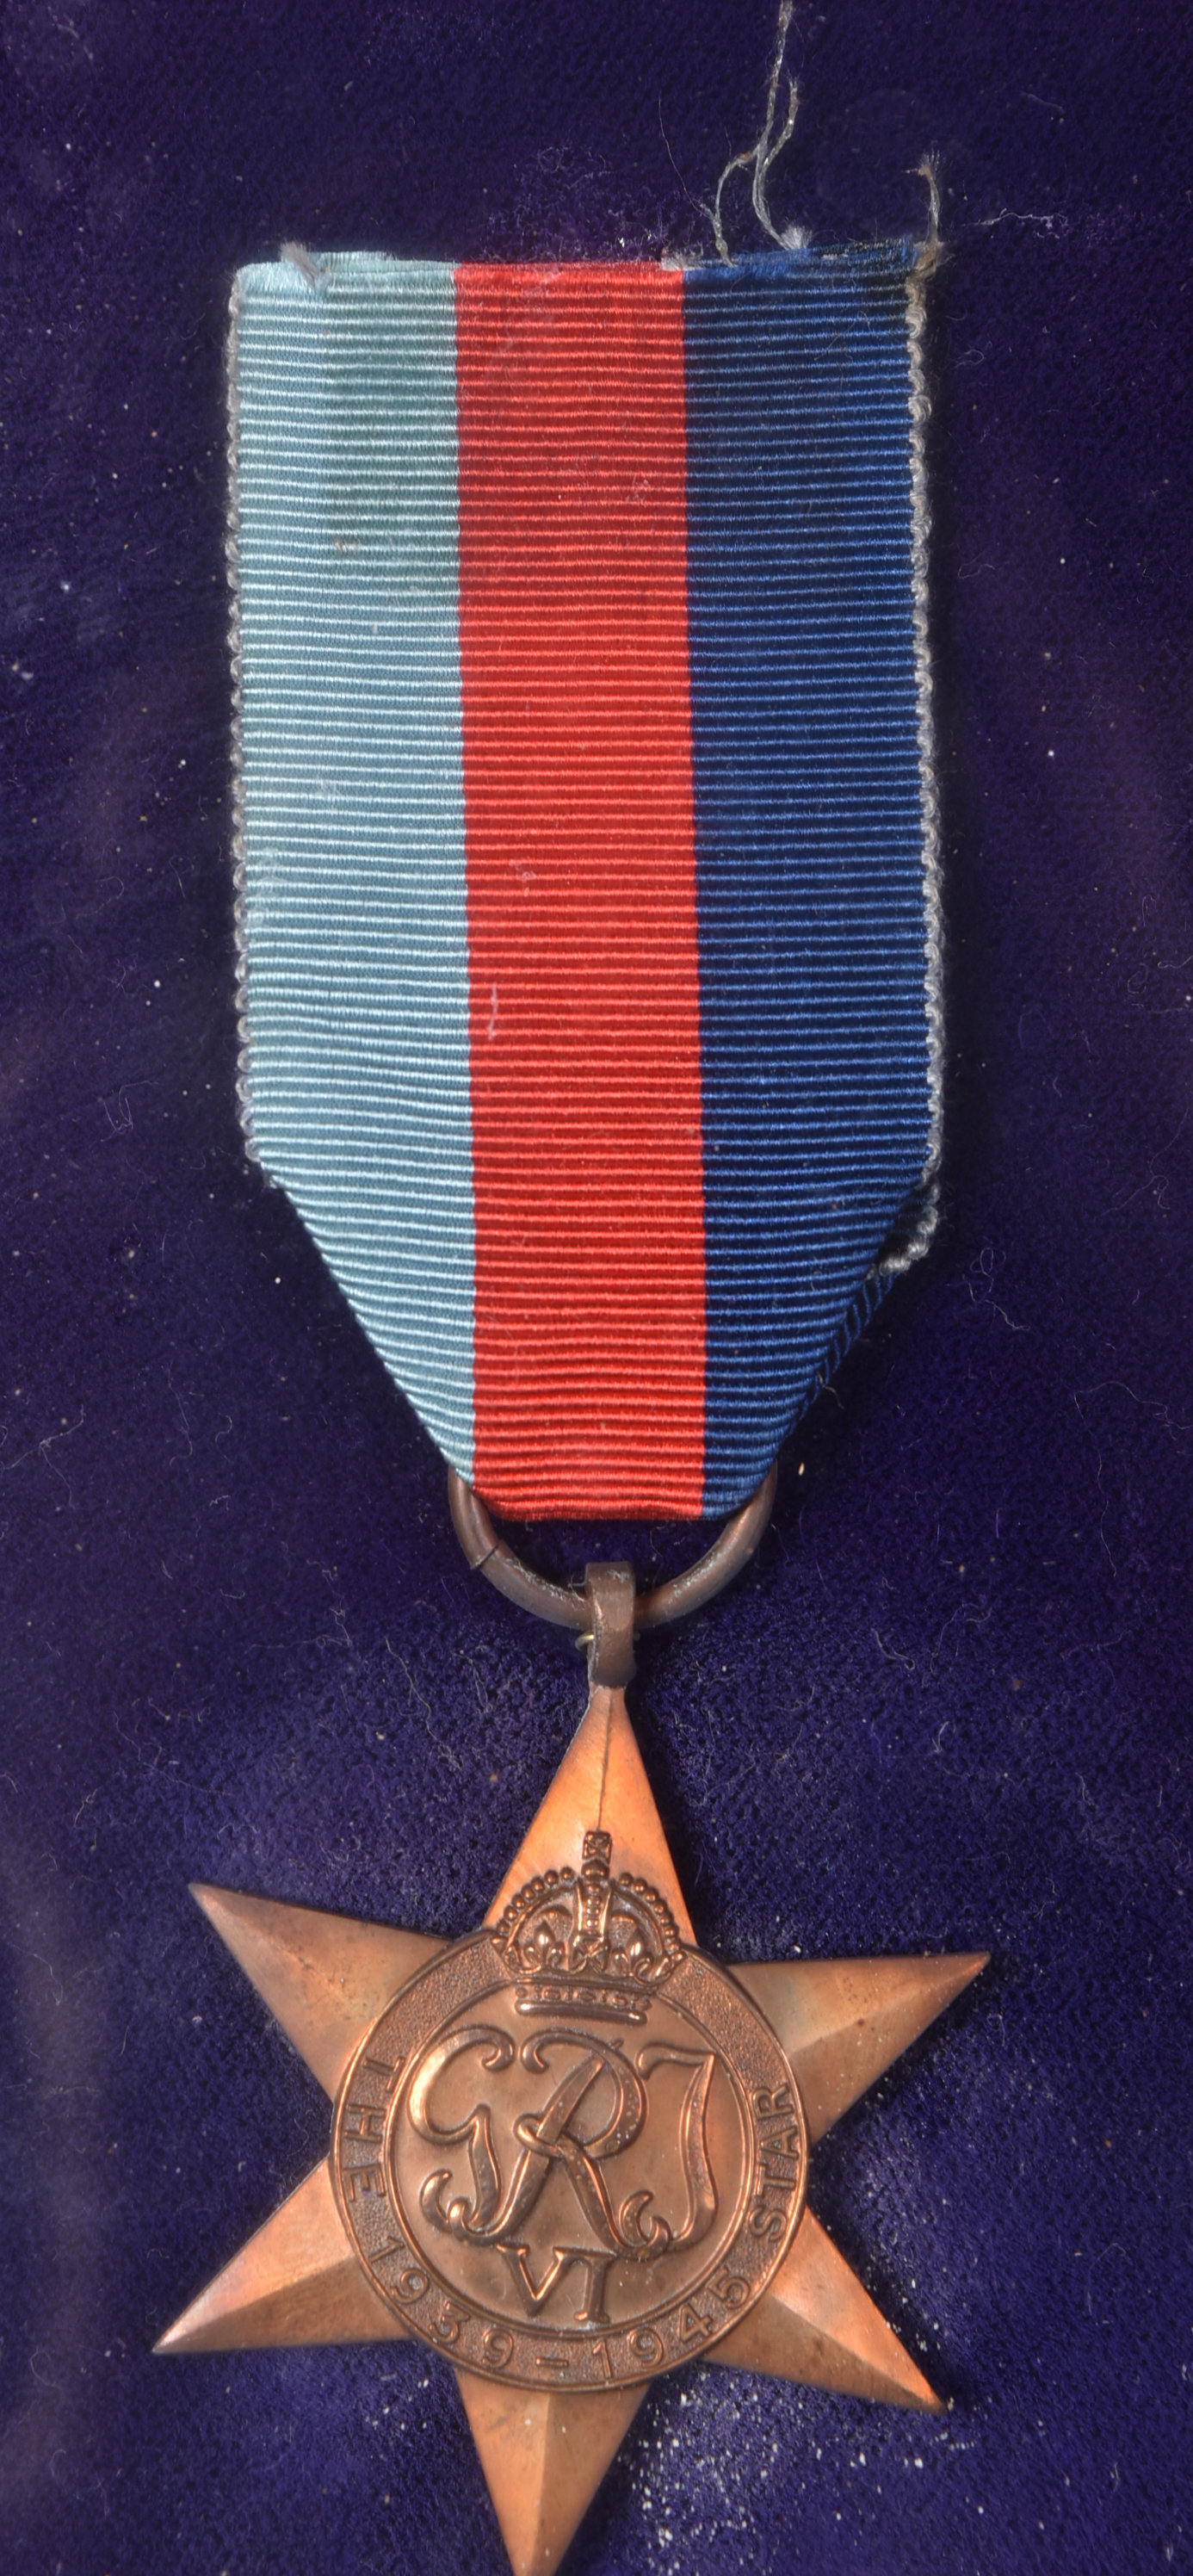 WWII SECOND WORLD WAR MEDAL TRIO - R. KELLY ROYAL NAVY - Image 5 of 8